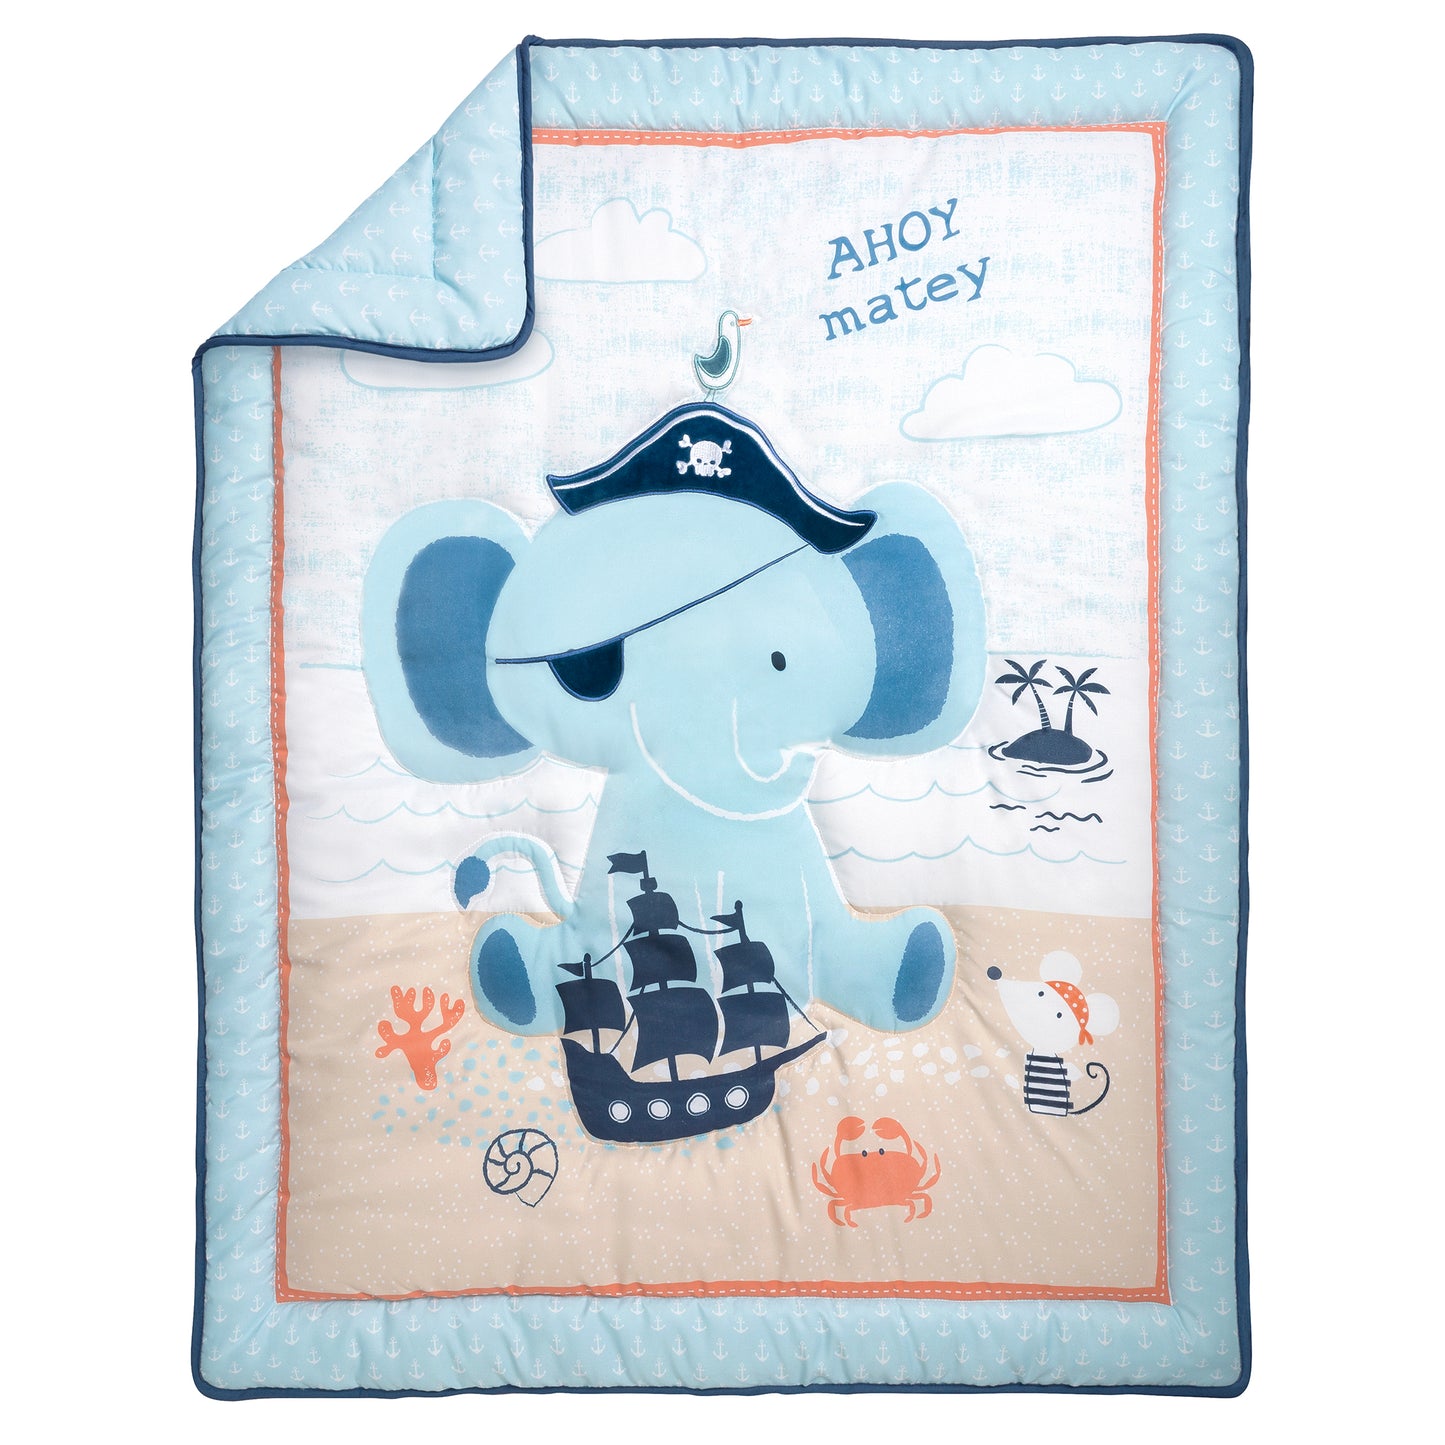 Ahoy Archie 4 Piece Crib Bedding Set by Sammy & Lou Crib Quilt with folded corner view